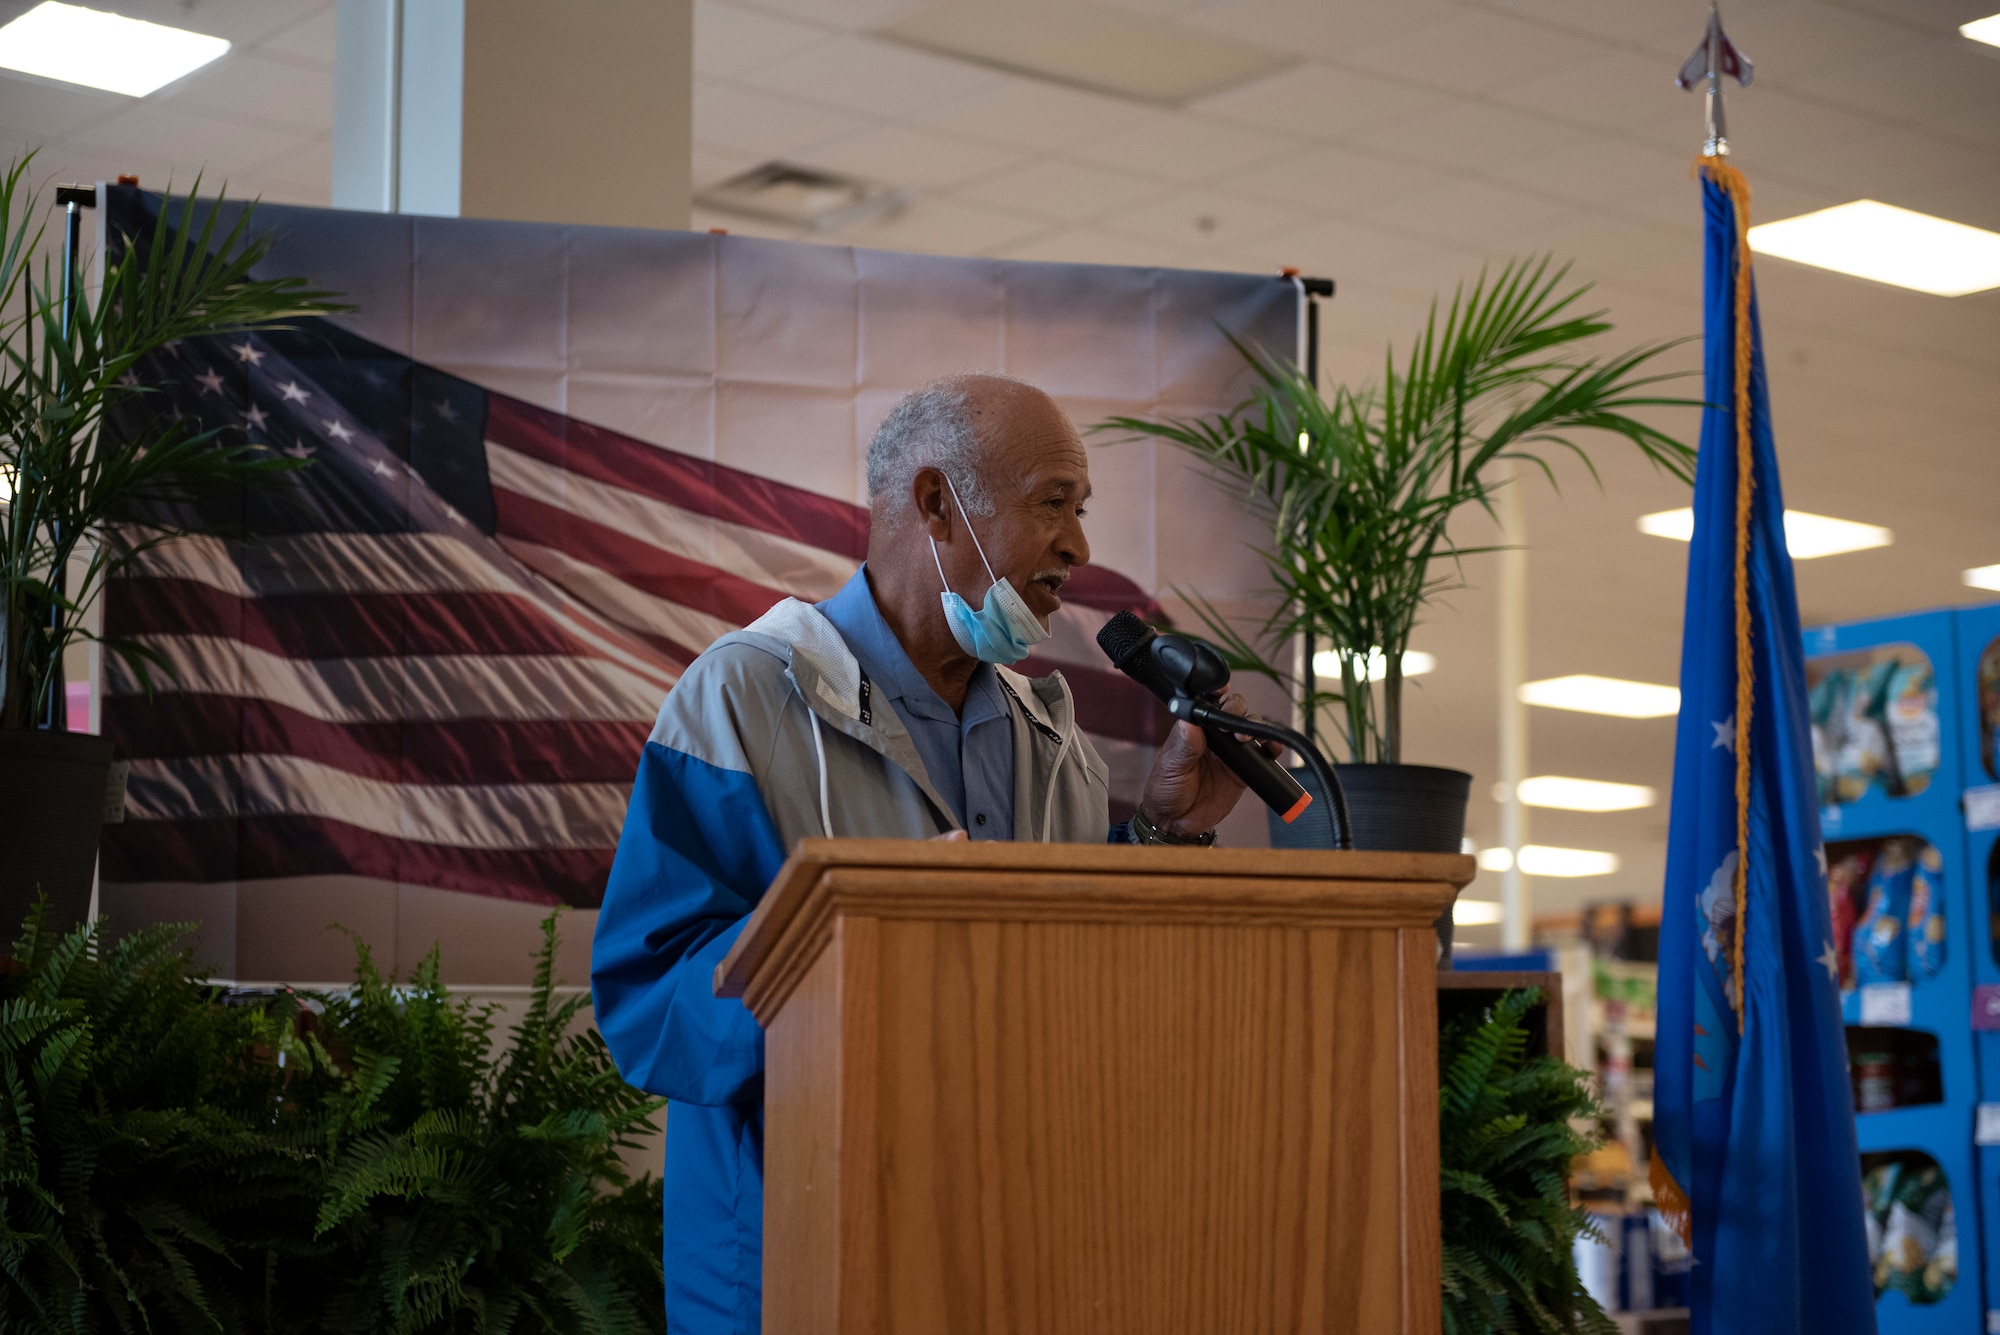 A photo of a man speaking into a microphone in front of a backdrop with an American Flag on it.